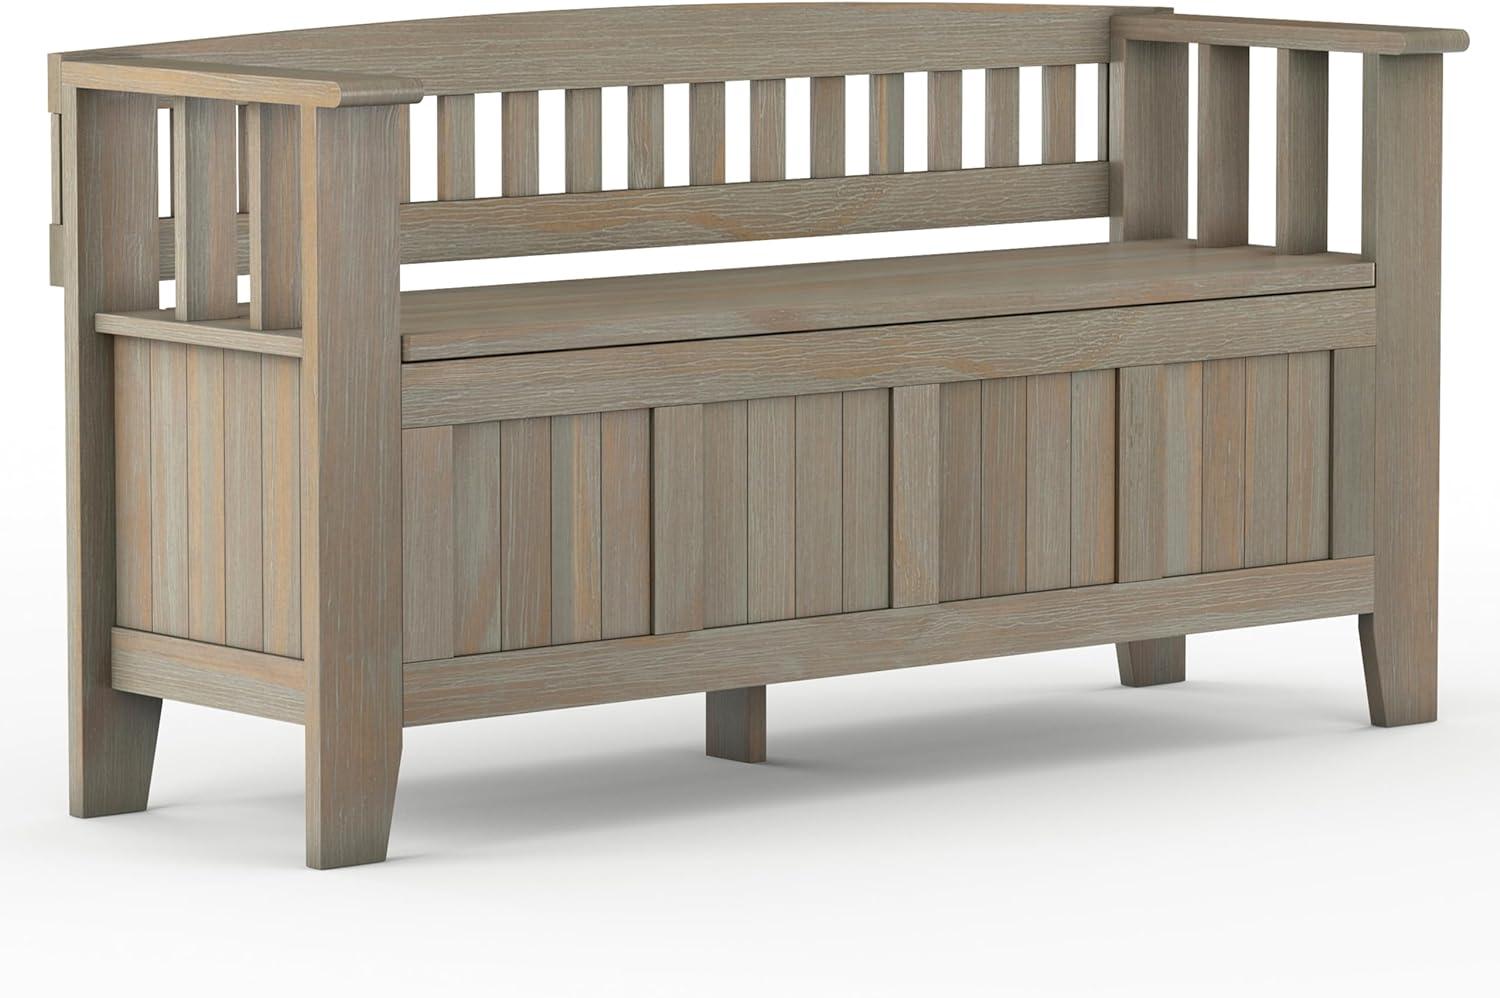 Acadian Transitional 48" Solid Wood Storage Bench in Distressed Grey